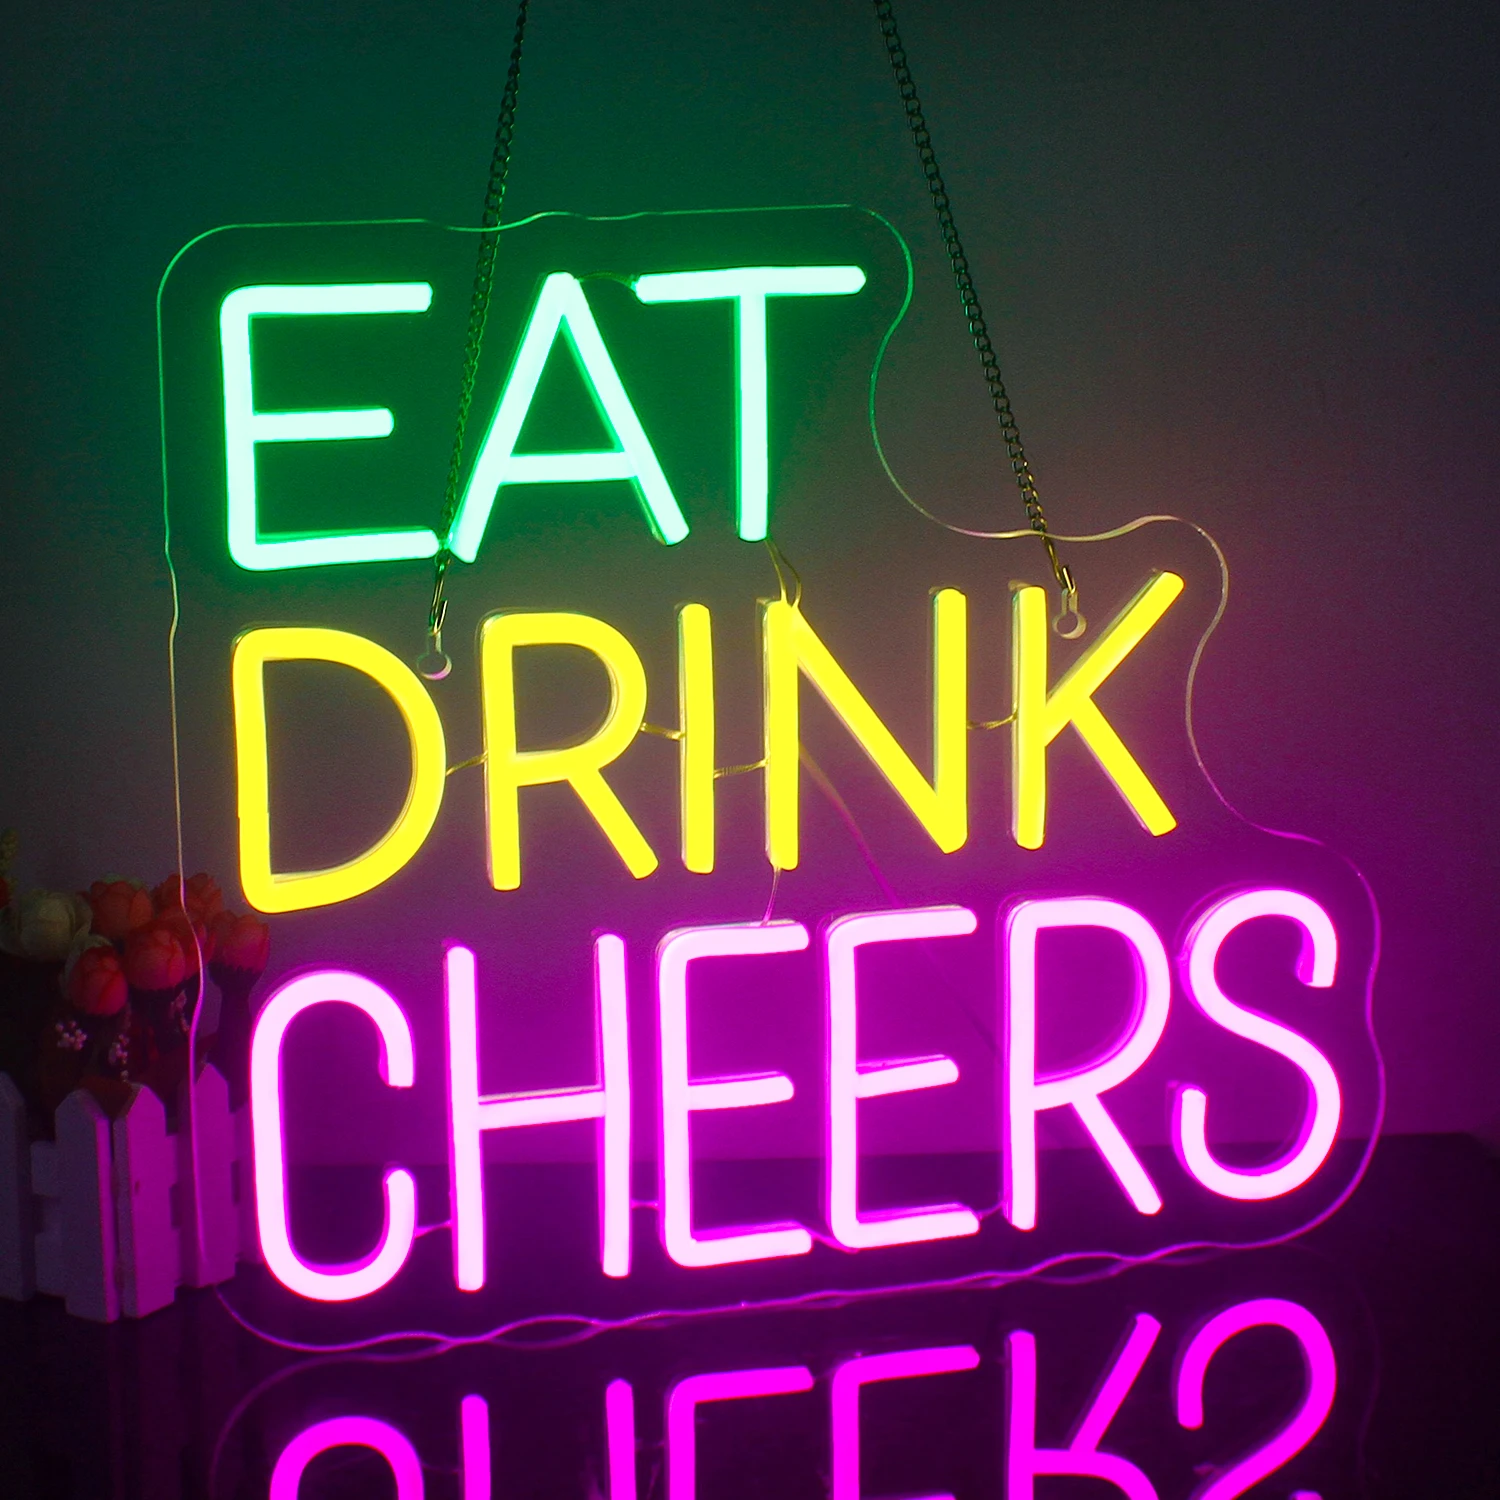 Eat Drink Cheers Neon Sign for Wall Decor USB Powered Led Neon Signs for Bar Man Cave Dessert Shop  Drink Party Neon Sign drinks neon signs cool drink cup led neon signs bar neon signs for wall decor usb bar club restaurant cafes shops party neon